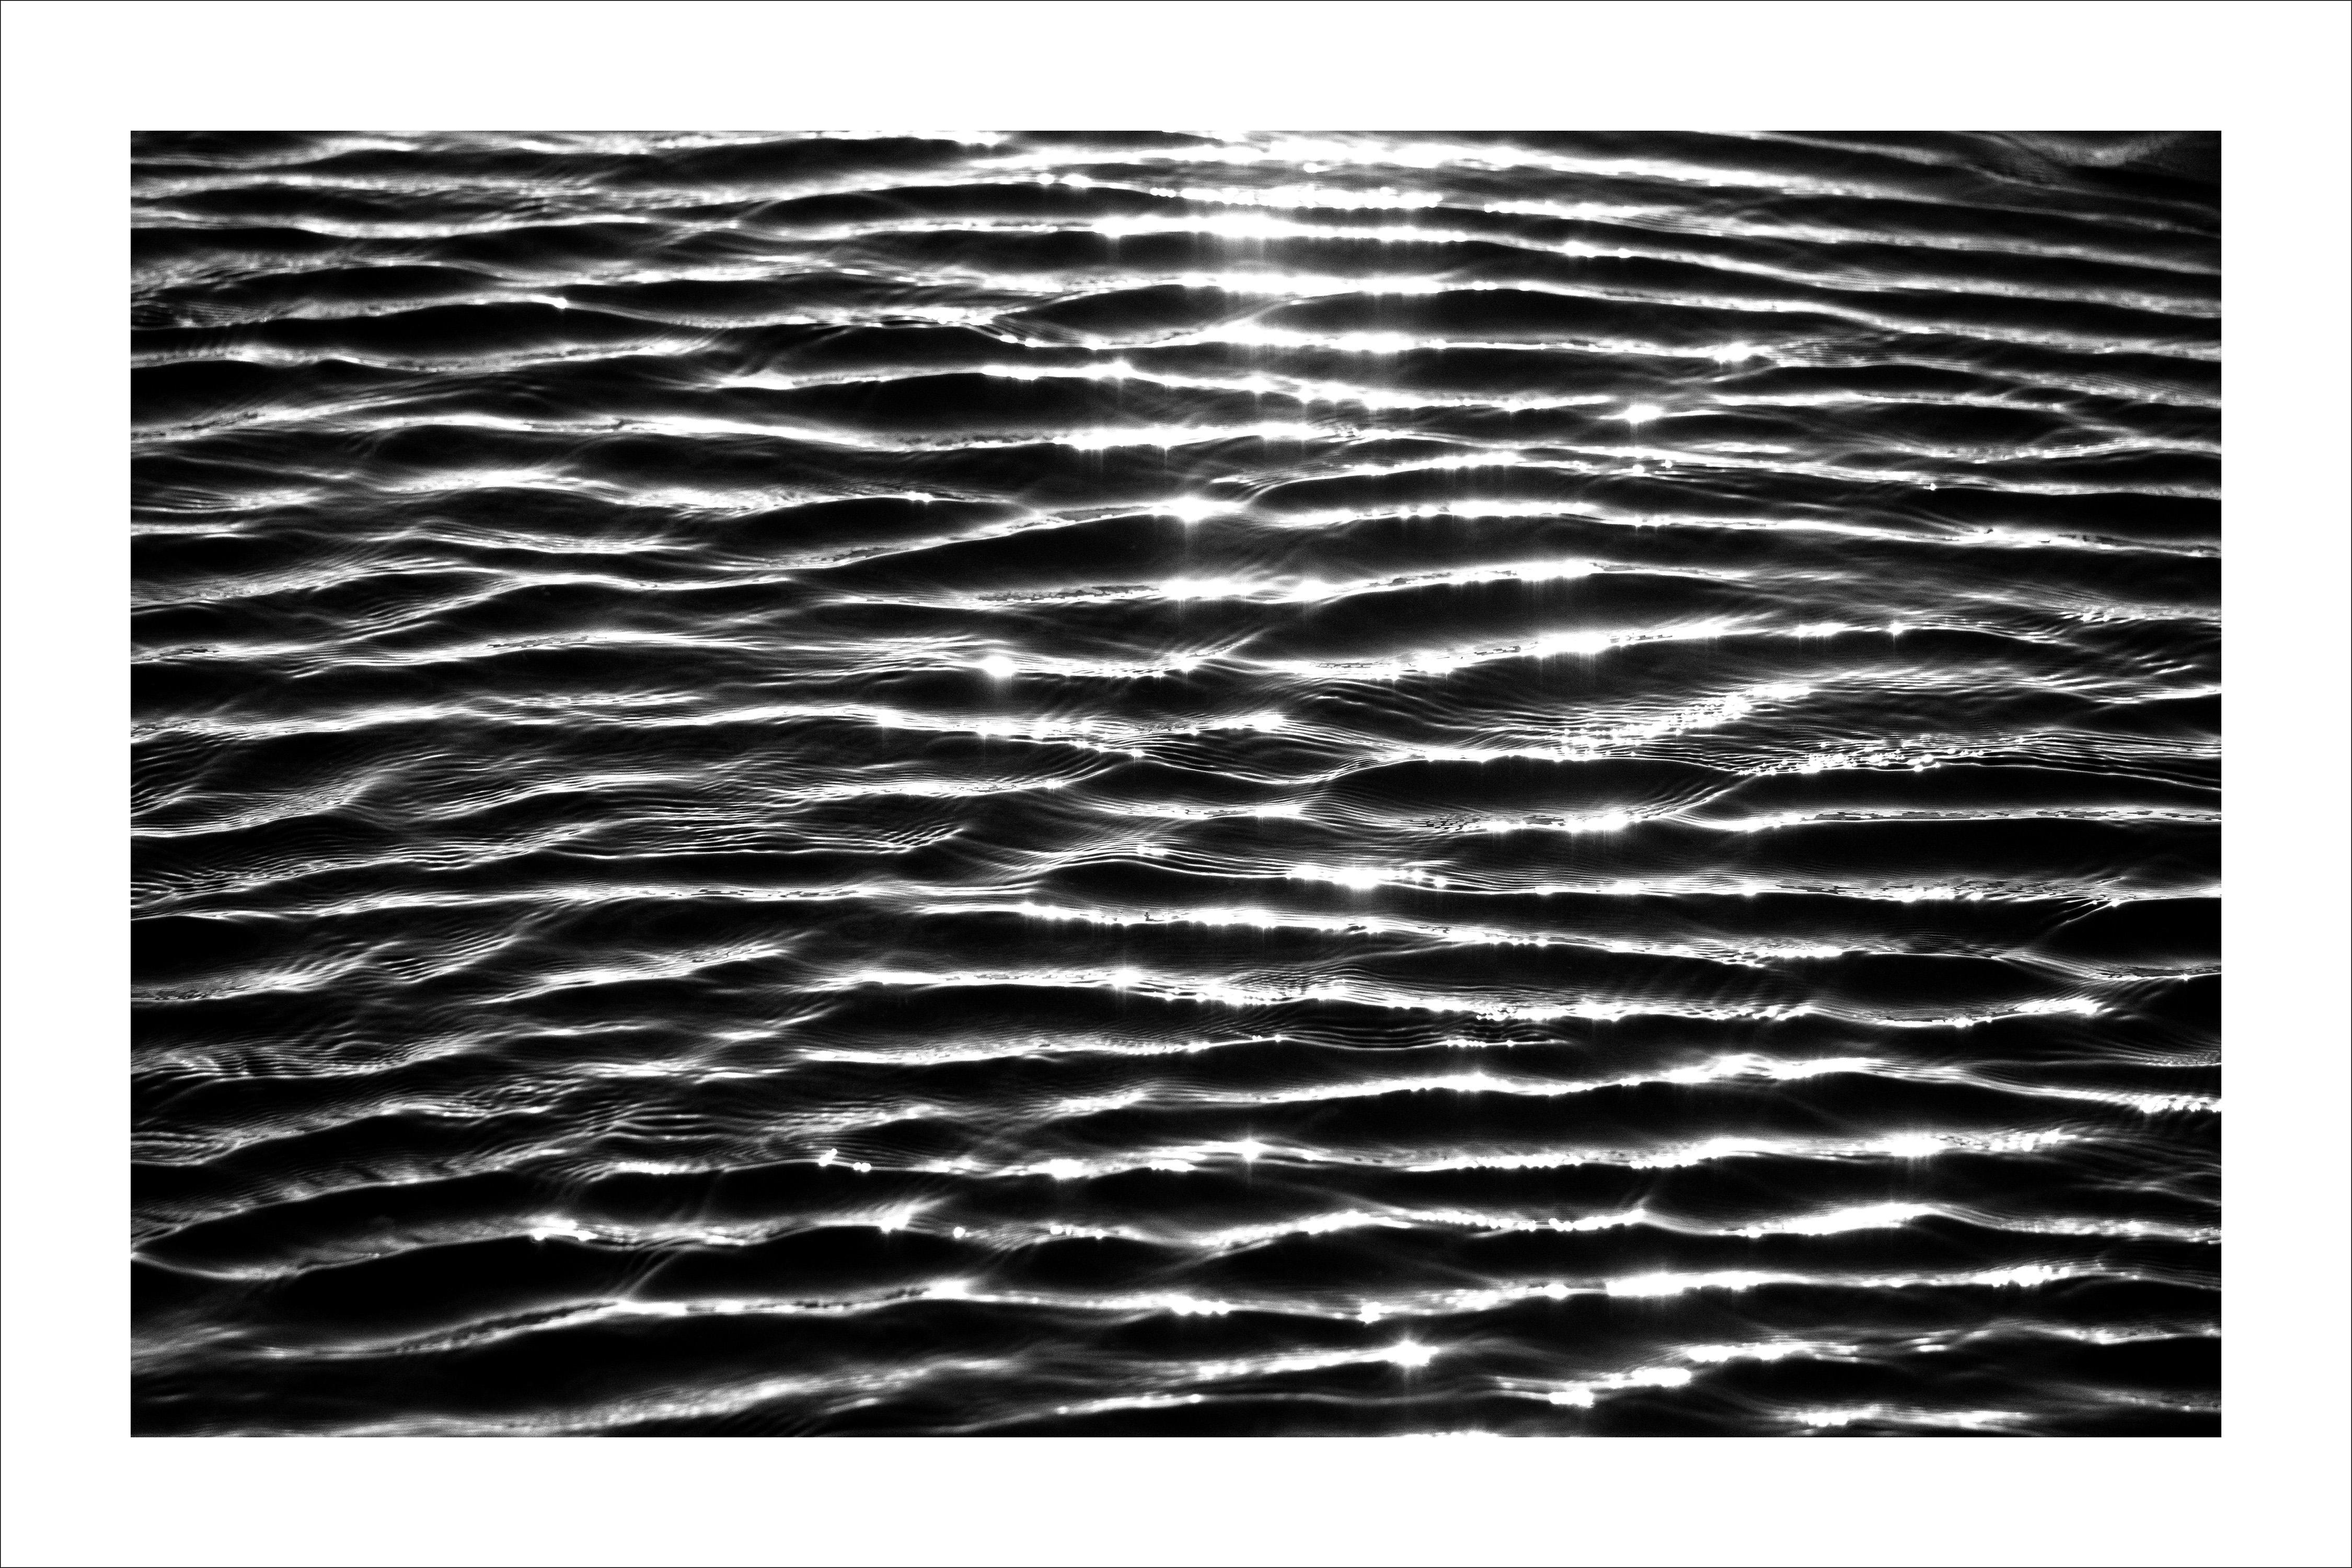 Kind of Cyan Black and White Photograph - Extra Large Black and White Giclée Print of Tranquil Water Patterns, Seascape